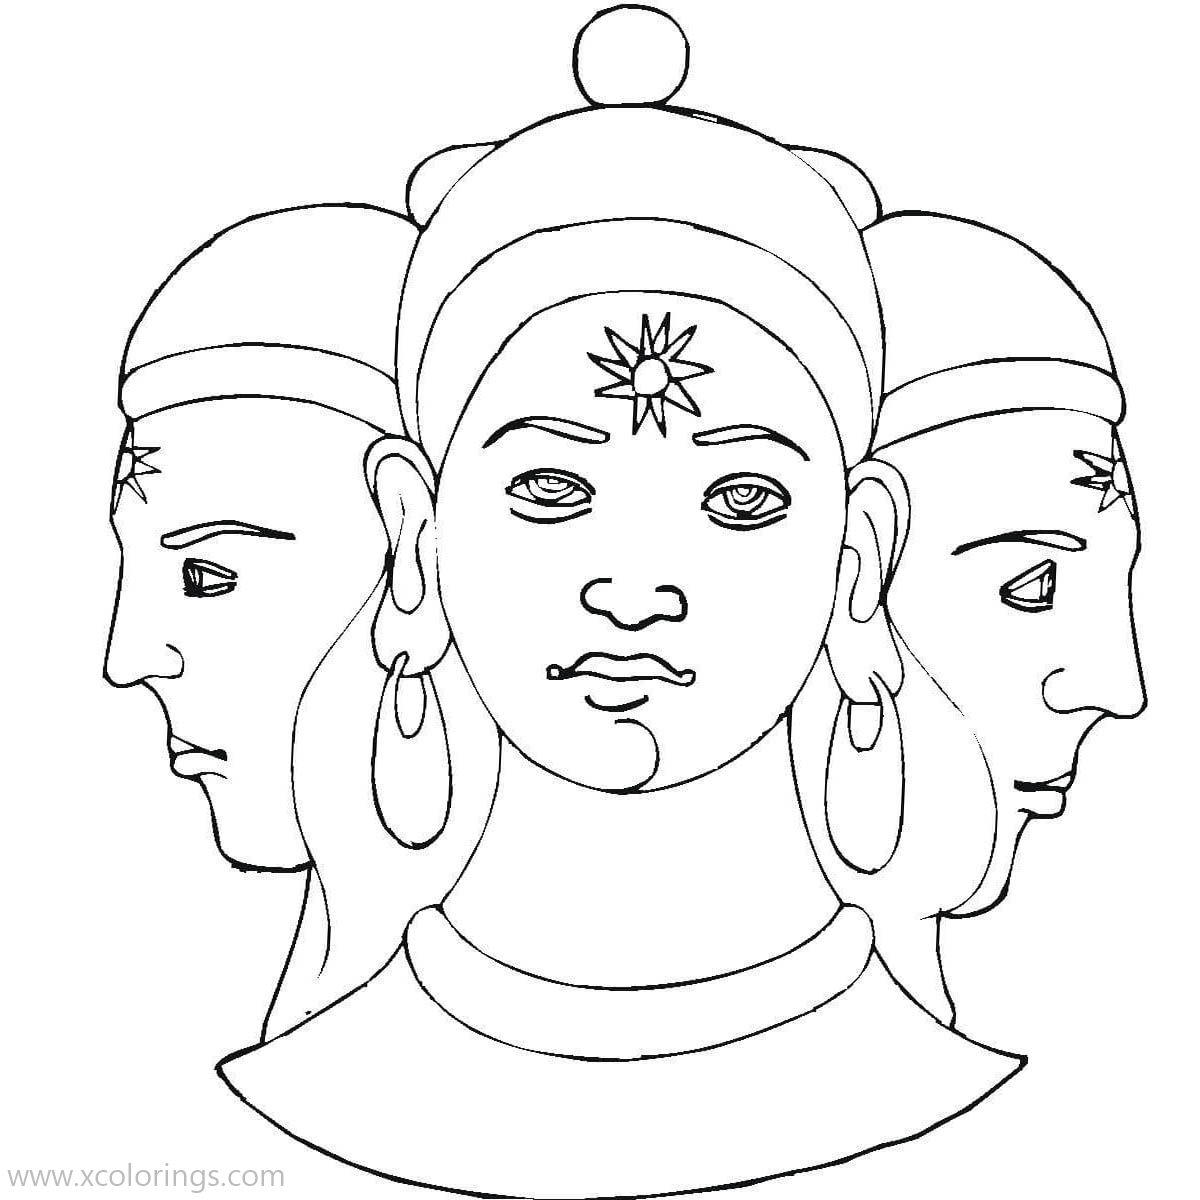 Free Three Heads Shiva Coloring Pages printable